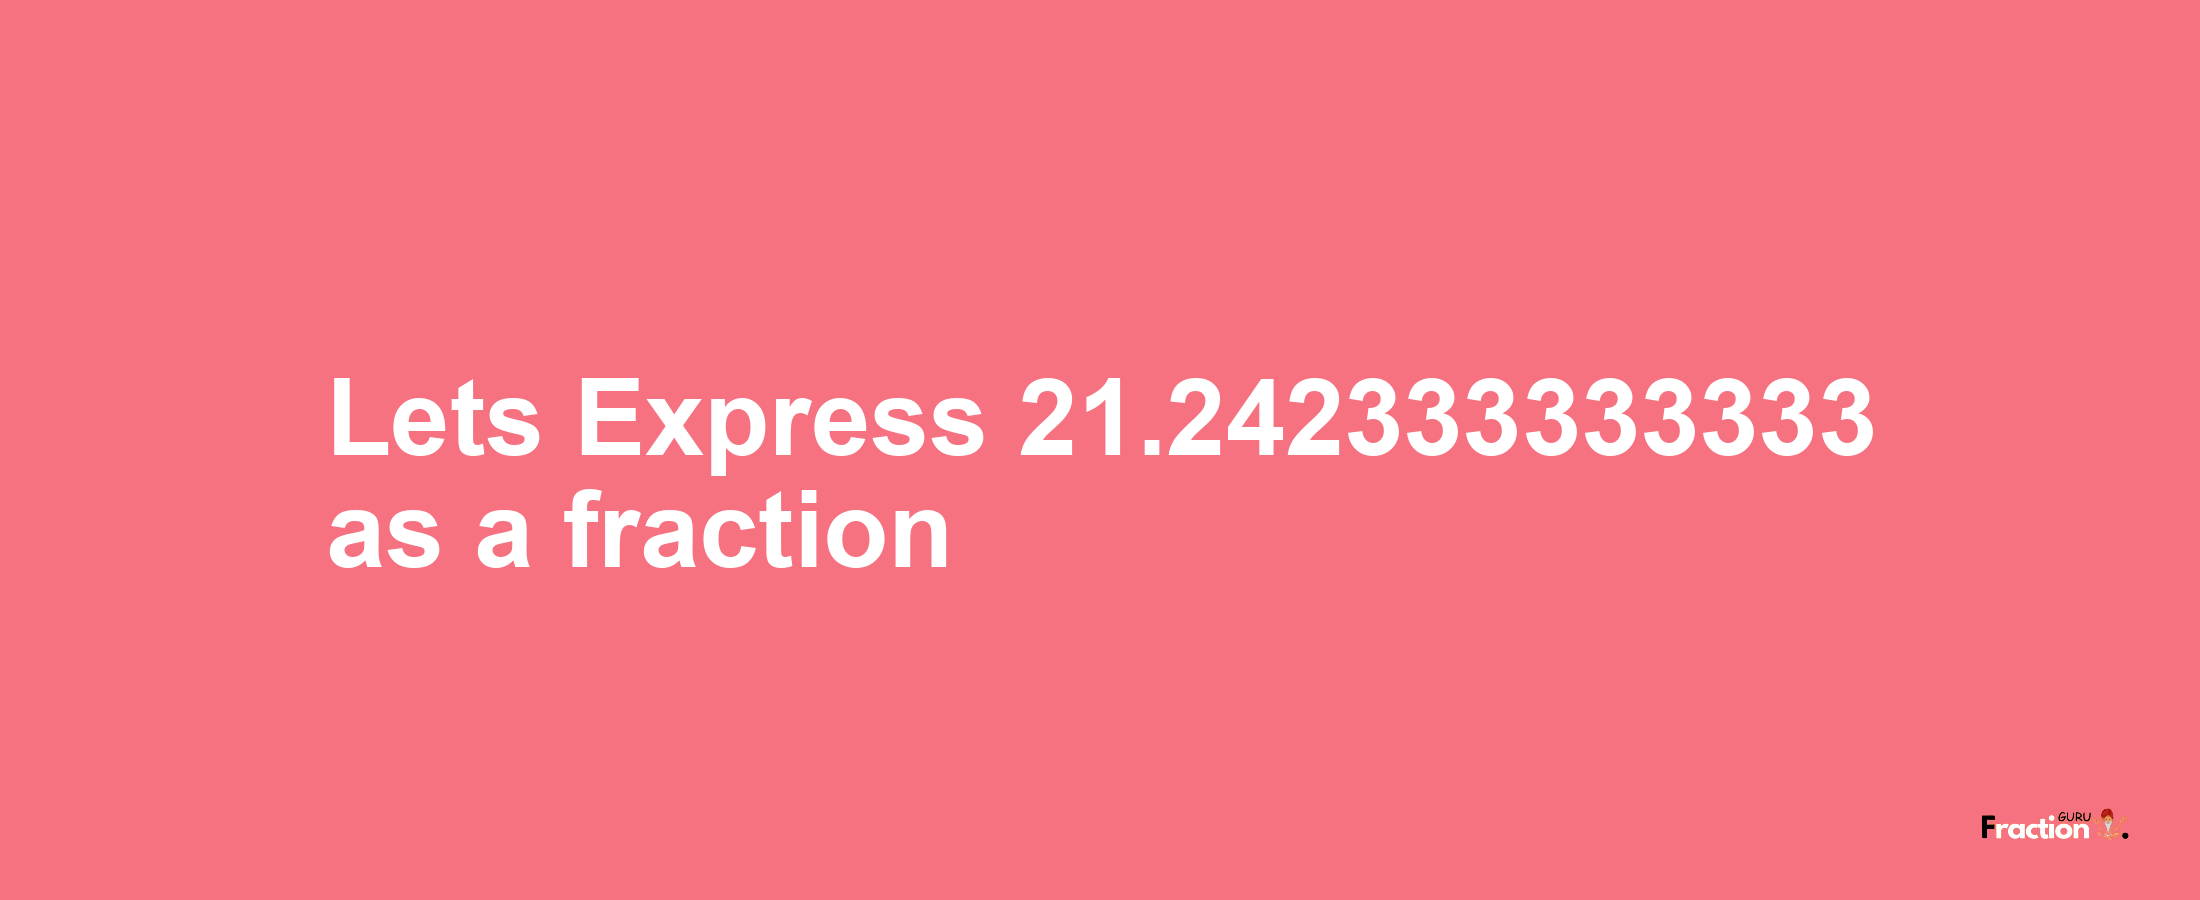 Lets Express 21.242333333333 as afraction